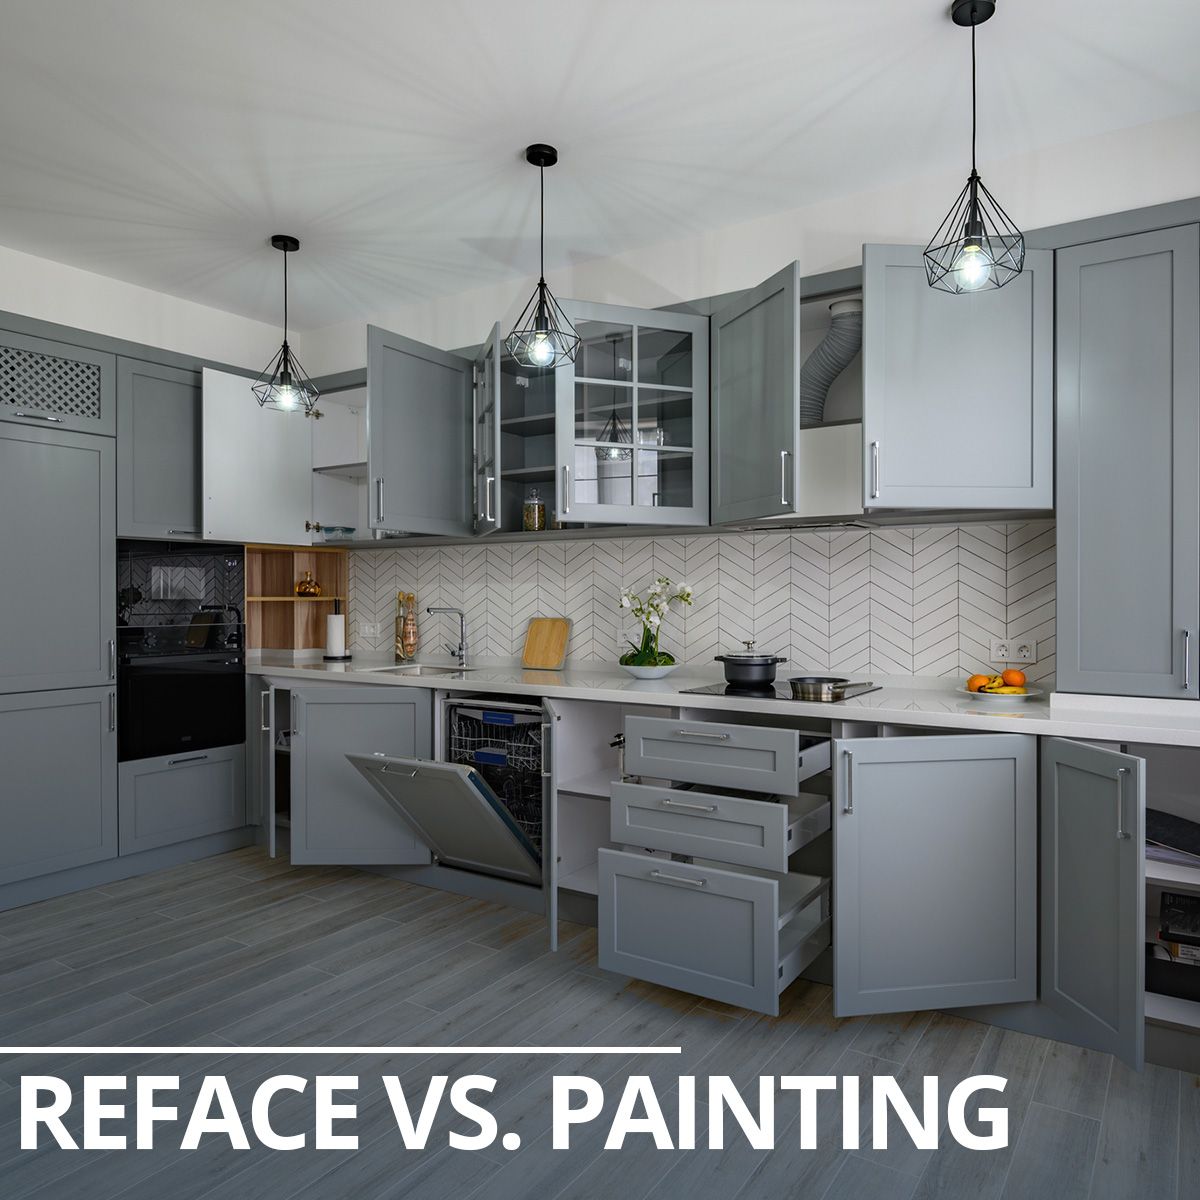 Reface vs. Painting